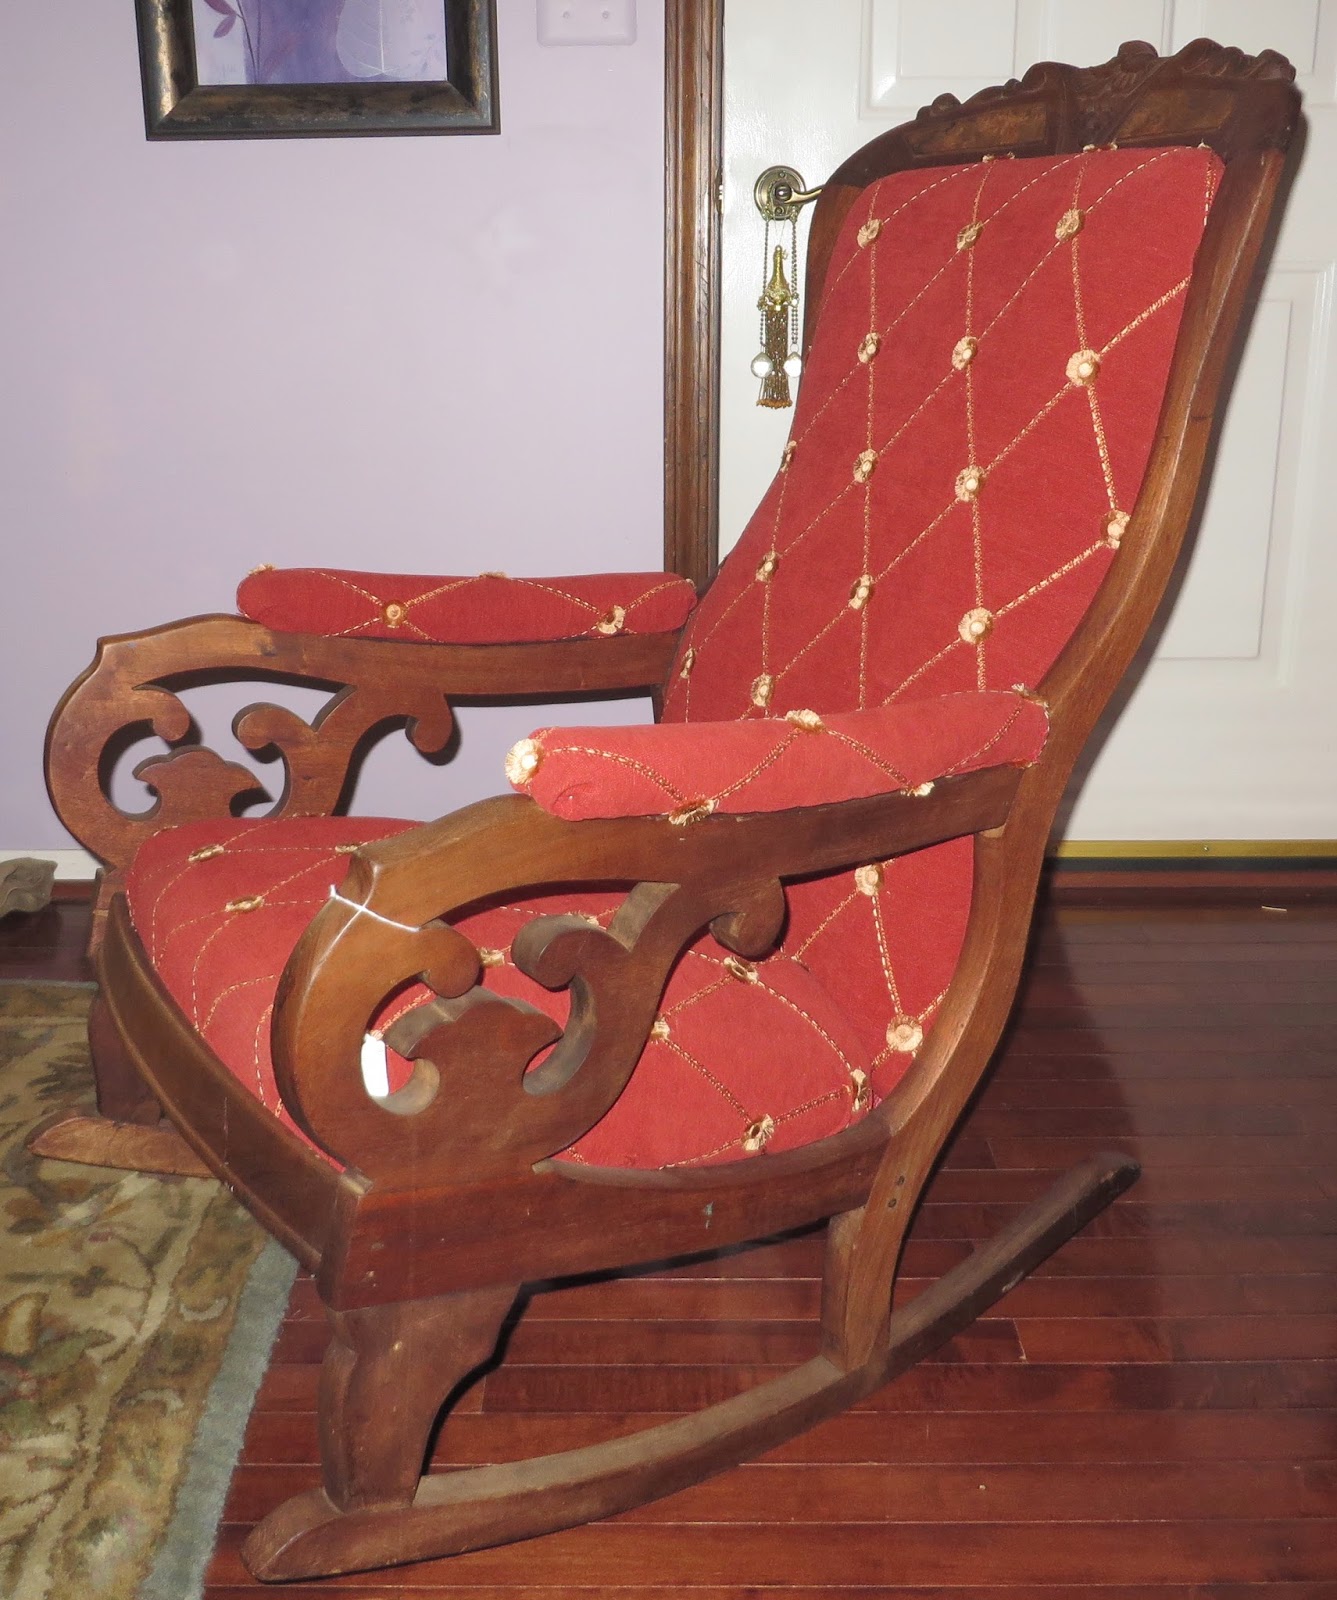 Antiques And Old Stuff: 3 Antique Chairs Reupholstered